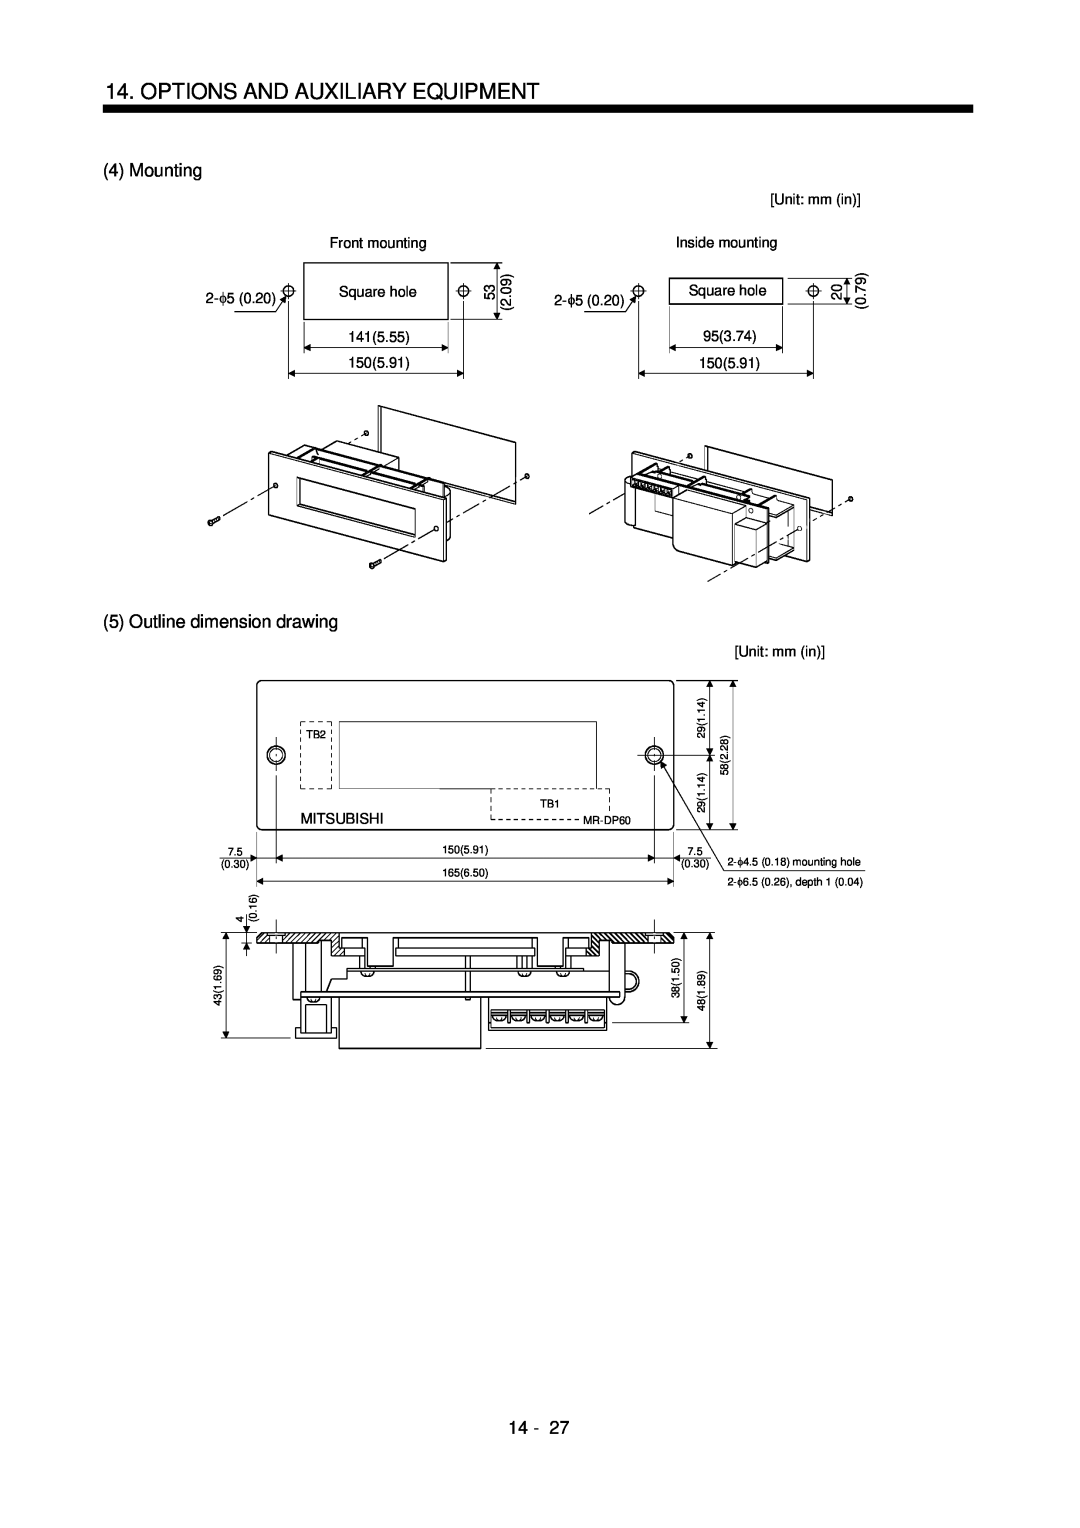 Mitsubishi Electronics MR-J2S- CL specifications Mounting, Outline dimension drawing, Options And Auxiliary Equipment, 14 